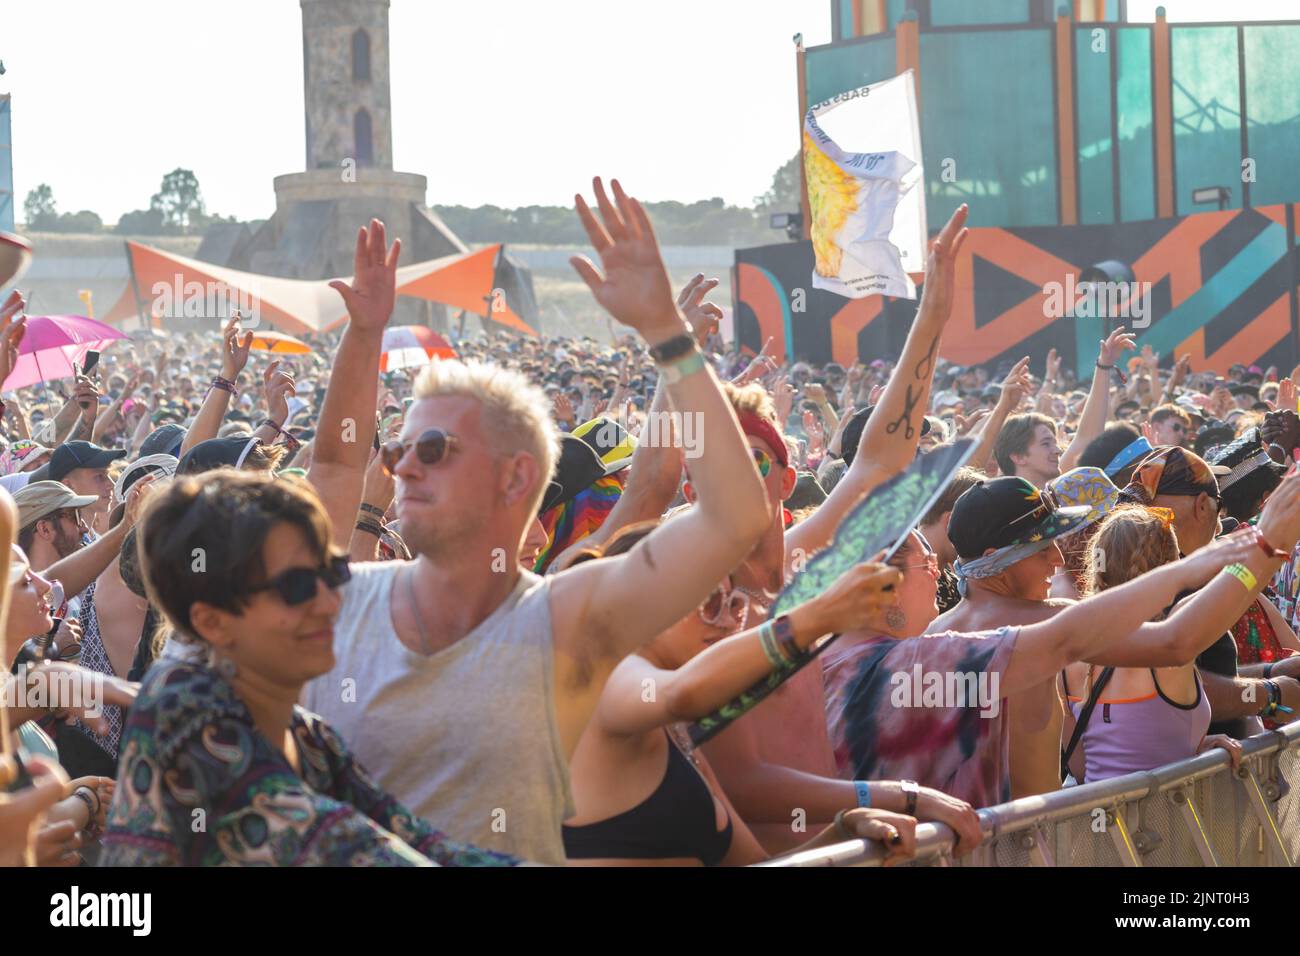 Boomtown, Winchester, UK Saturday 13 August 2022 De La Soul play Grand Central at Boomtown 2022 Credit: Denise Laura Baker/Alamy Live News Credit: Denise Laura Baker/Alamy Live News Stock Photo